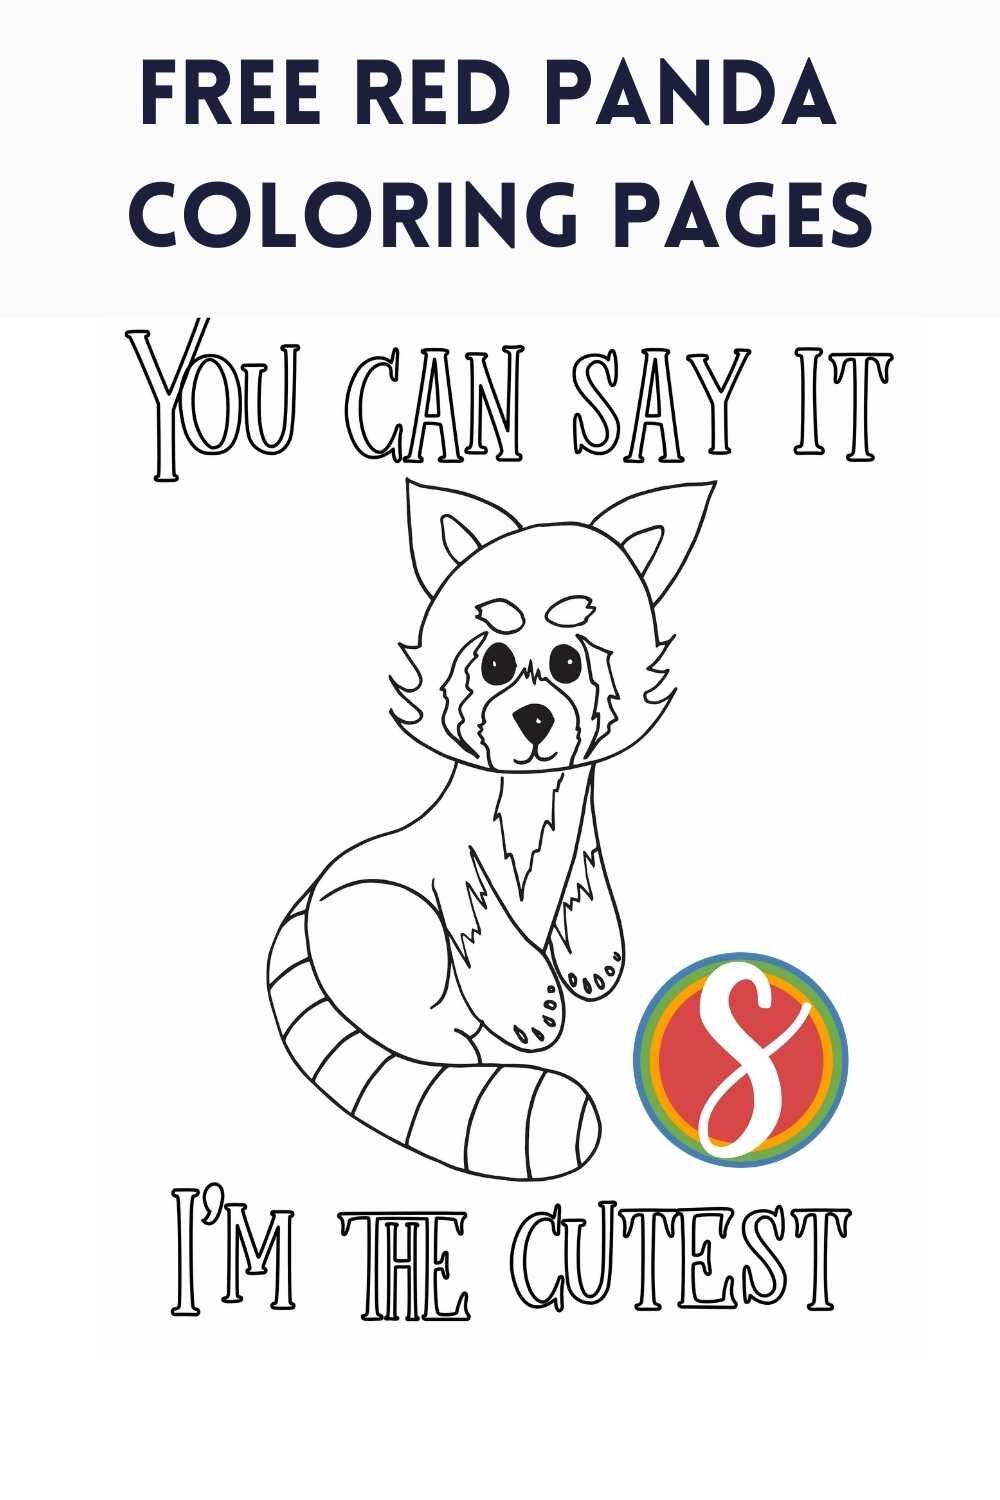 You can say it - I’m the cutest - a simple and easy and cute and FREE red panda coloring page printable sheet from Stevie Doodles